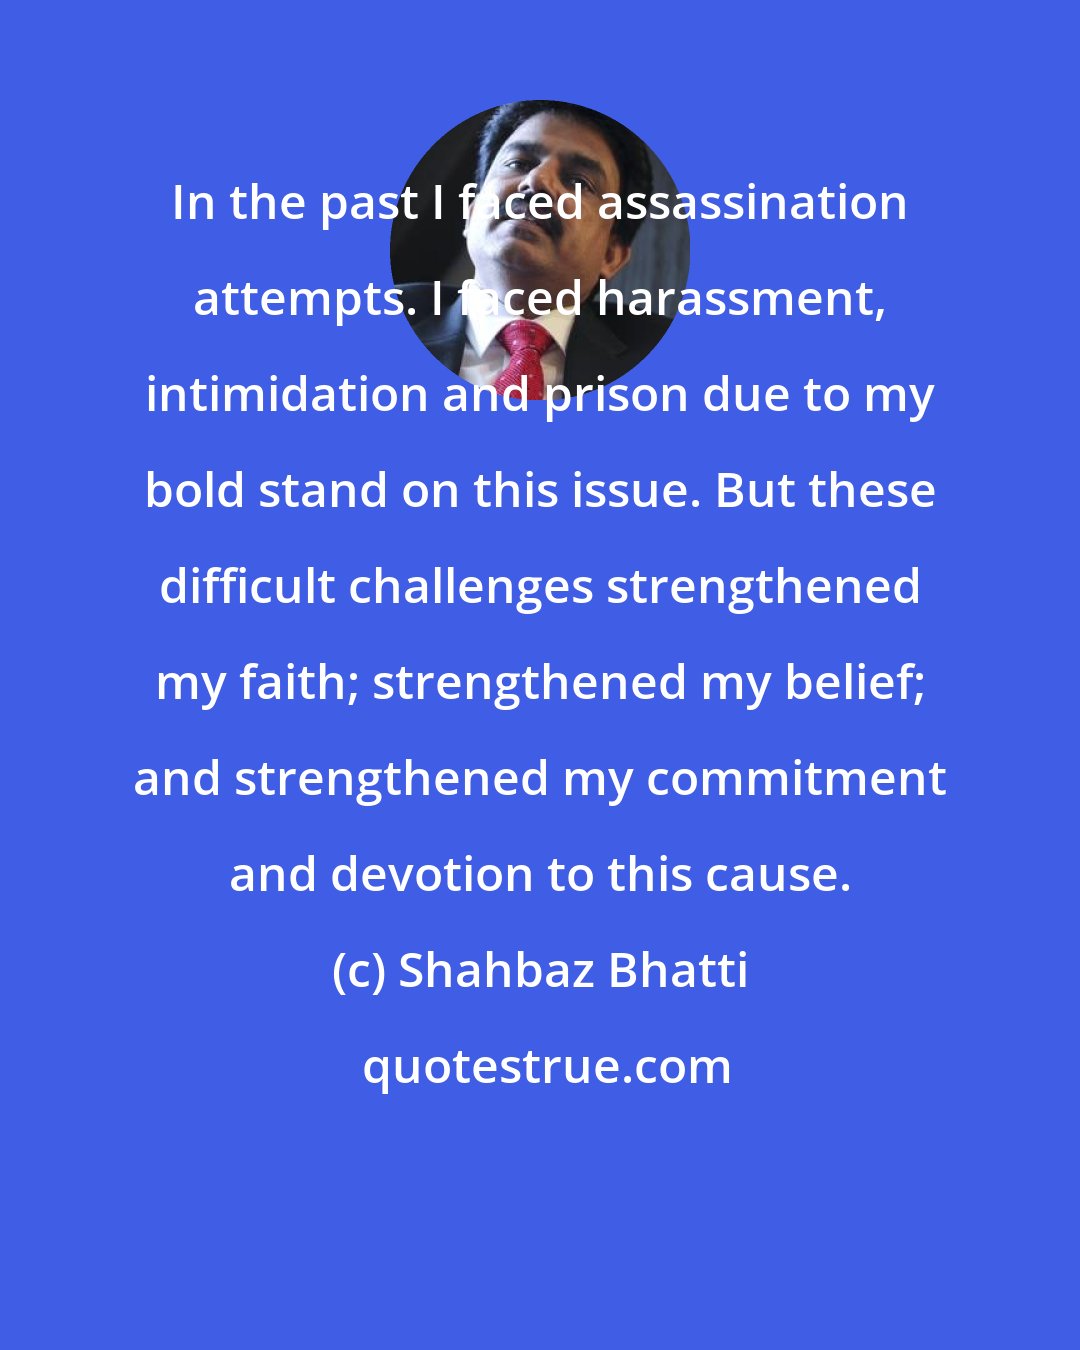 Shahbaz Bhatti: In the past I faced assassination attempts. I faced harassment, intimidation and prison due to my bold stand on this issue. But these difficult challenges strengthened my faith; strengthened my belief; and strengthened my commitment and devotion to this cause.